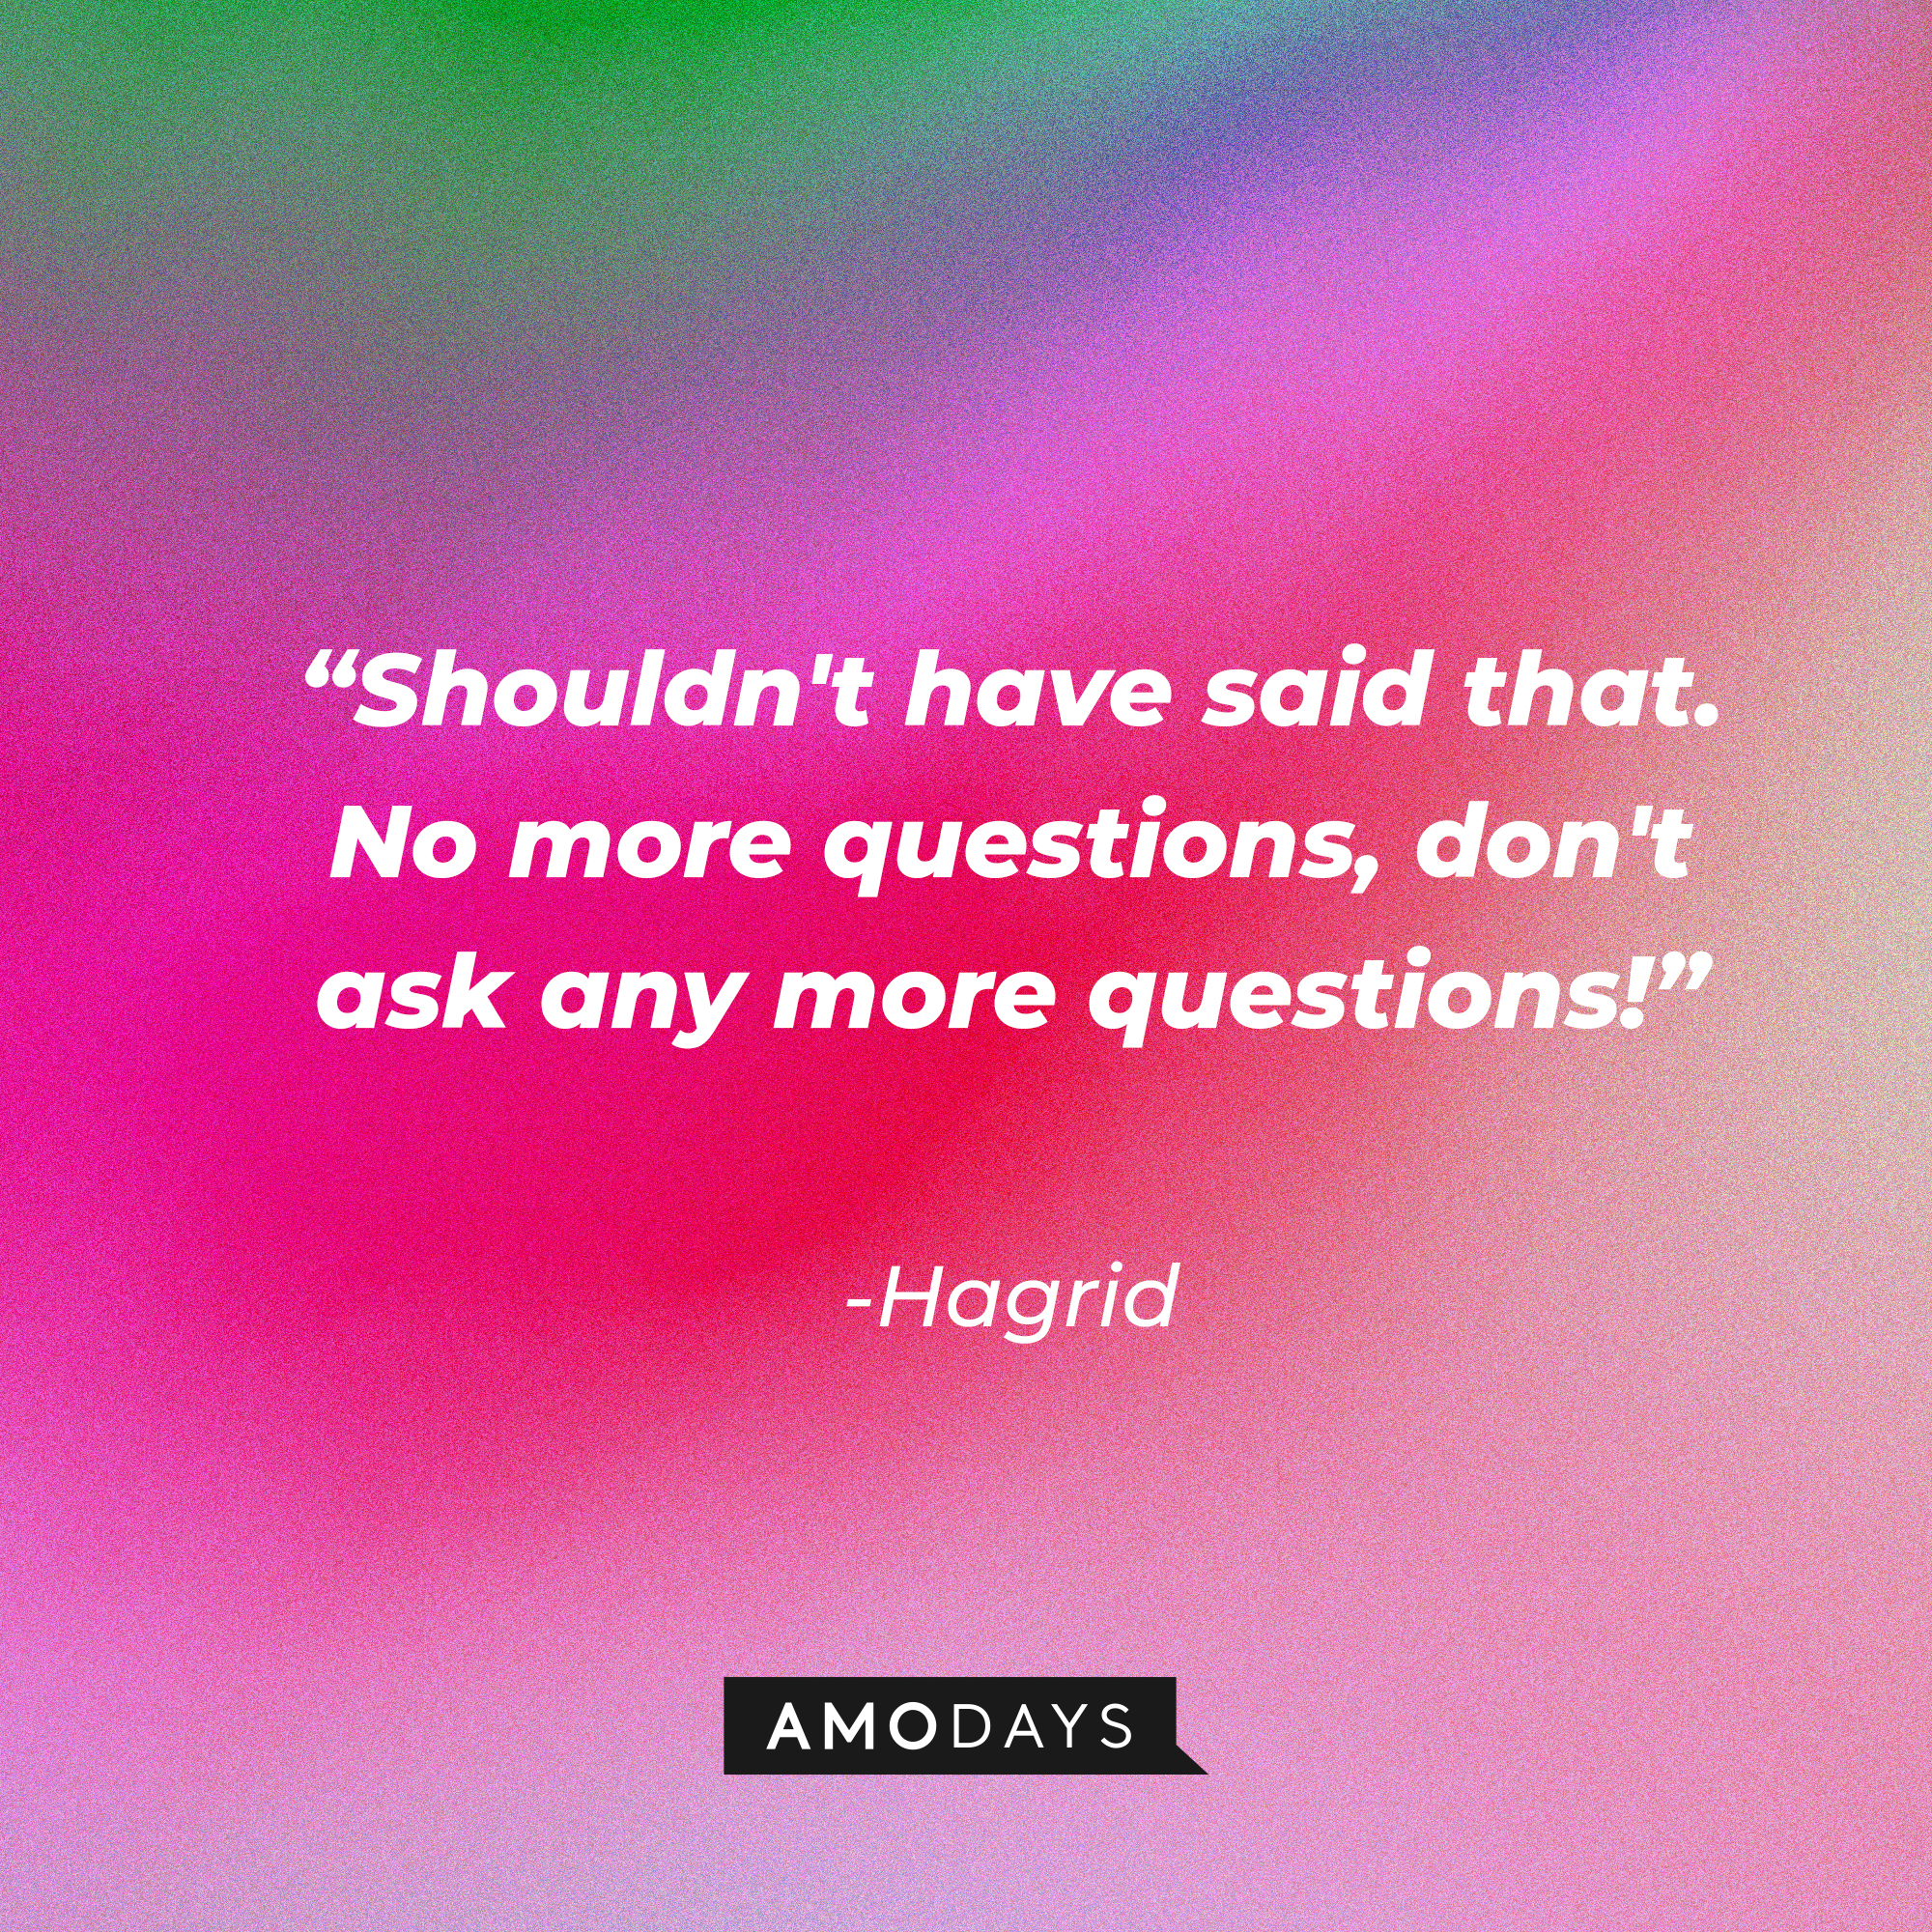 Hagrid's quote: "Shouldn't have said that. No more questions, don't ask any more questions!" | Source: AmoDays